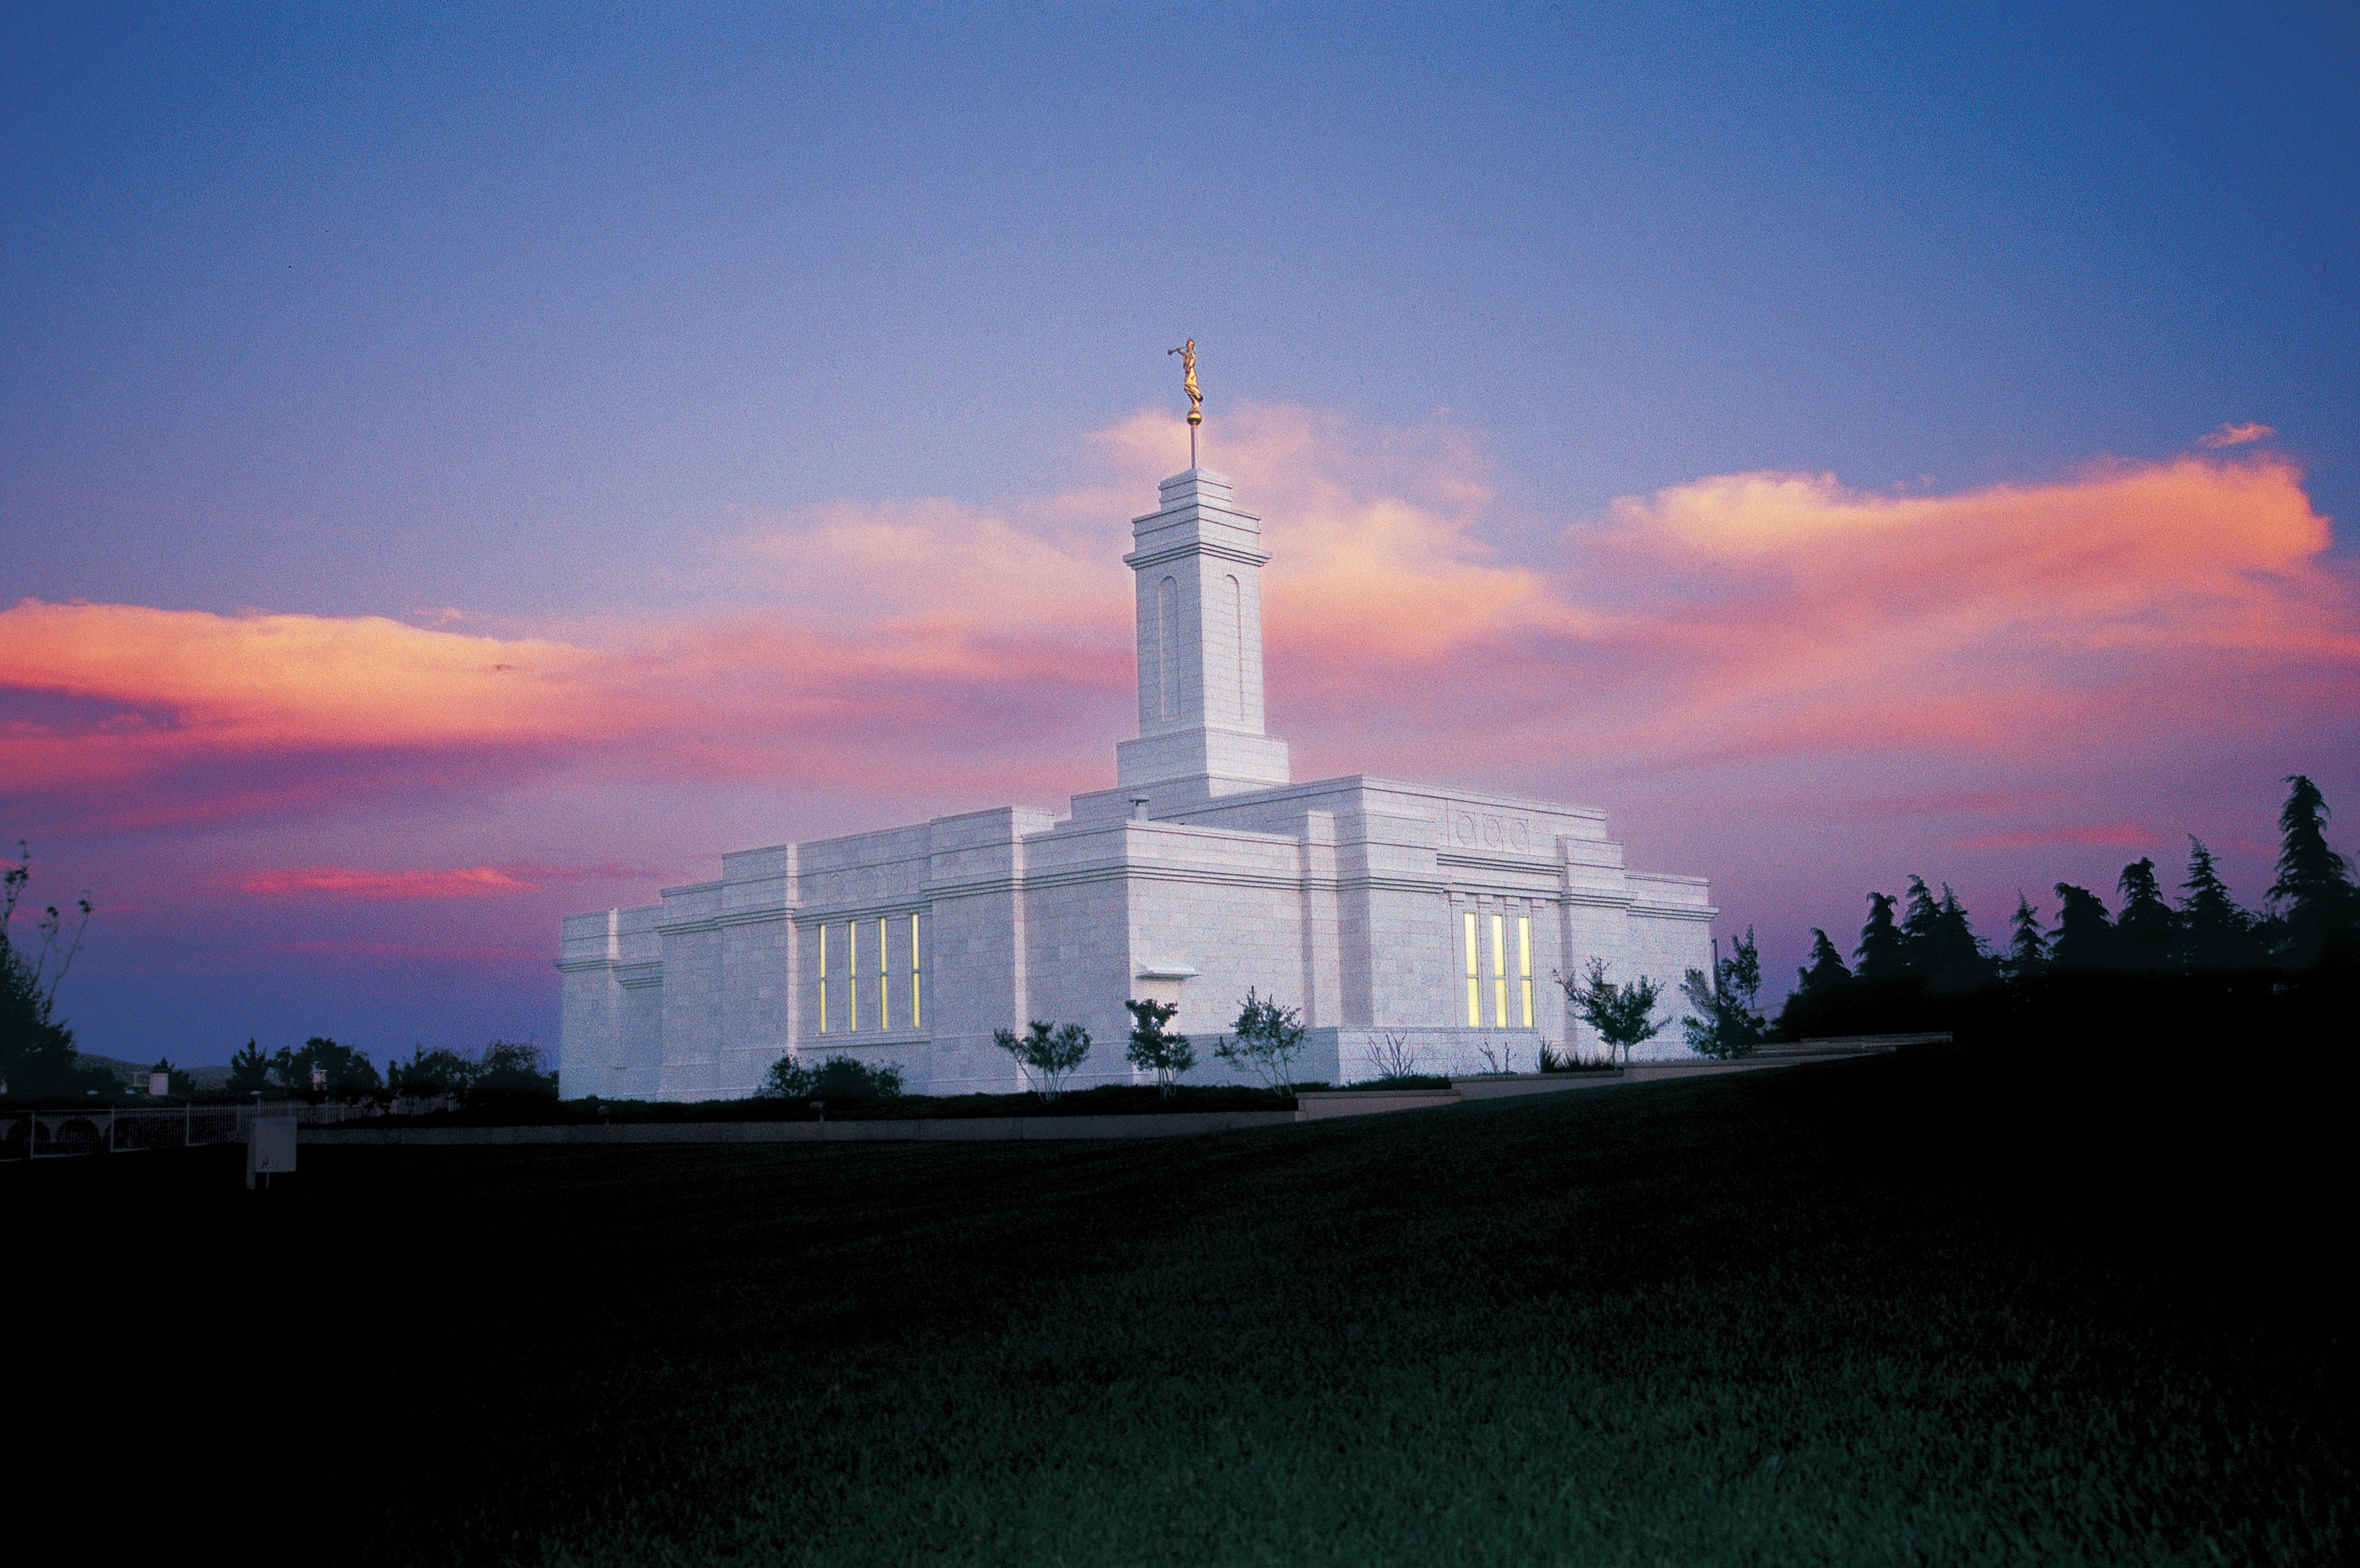 An exterior view of the Colonia Juárez Chihuahua Mexico Temple and grounds in the evening.